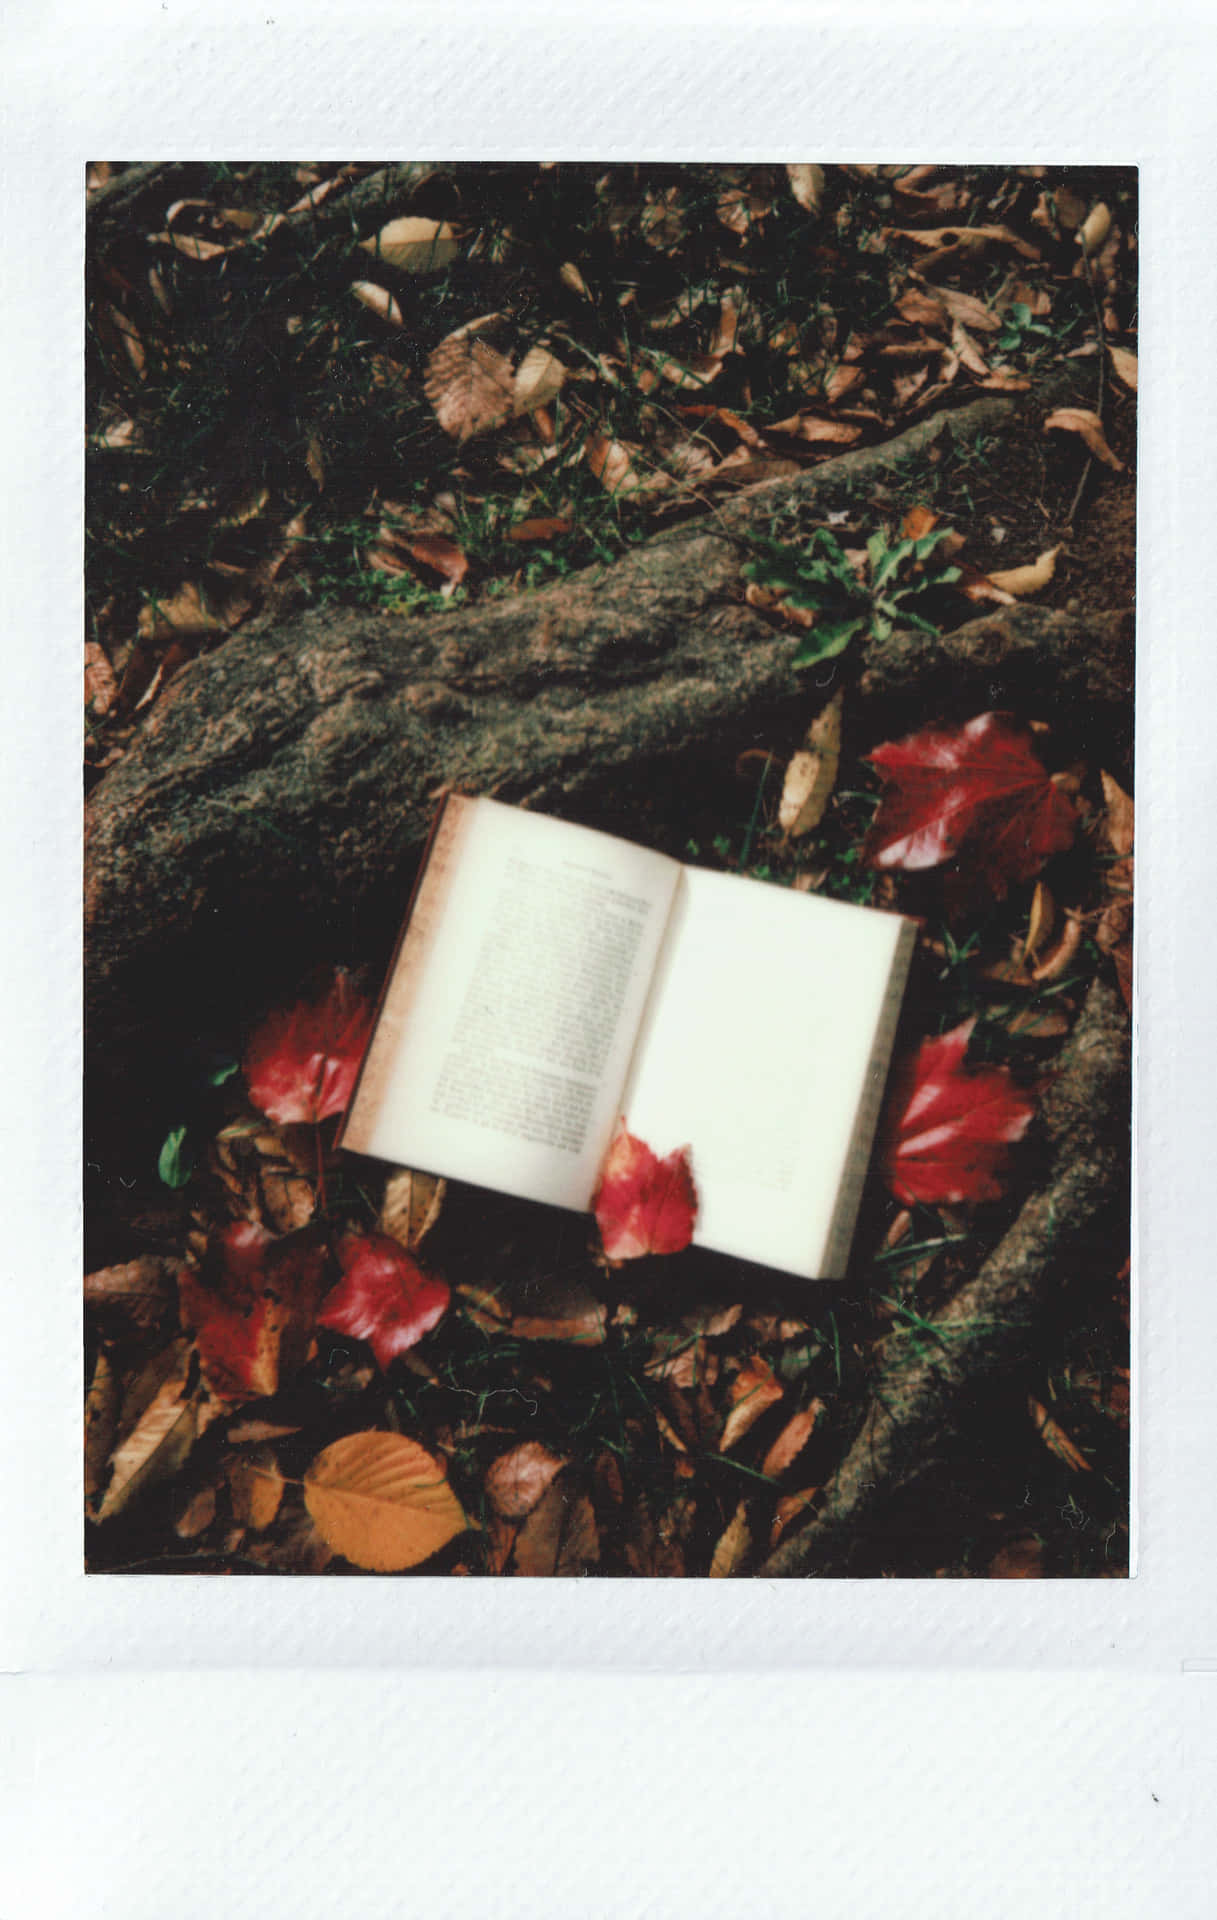 A Book Is Sitting On The Ground With Leaves Around It